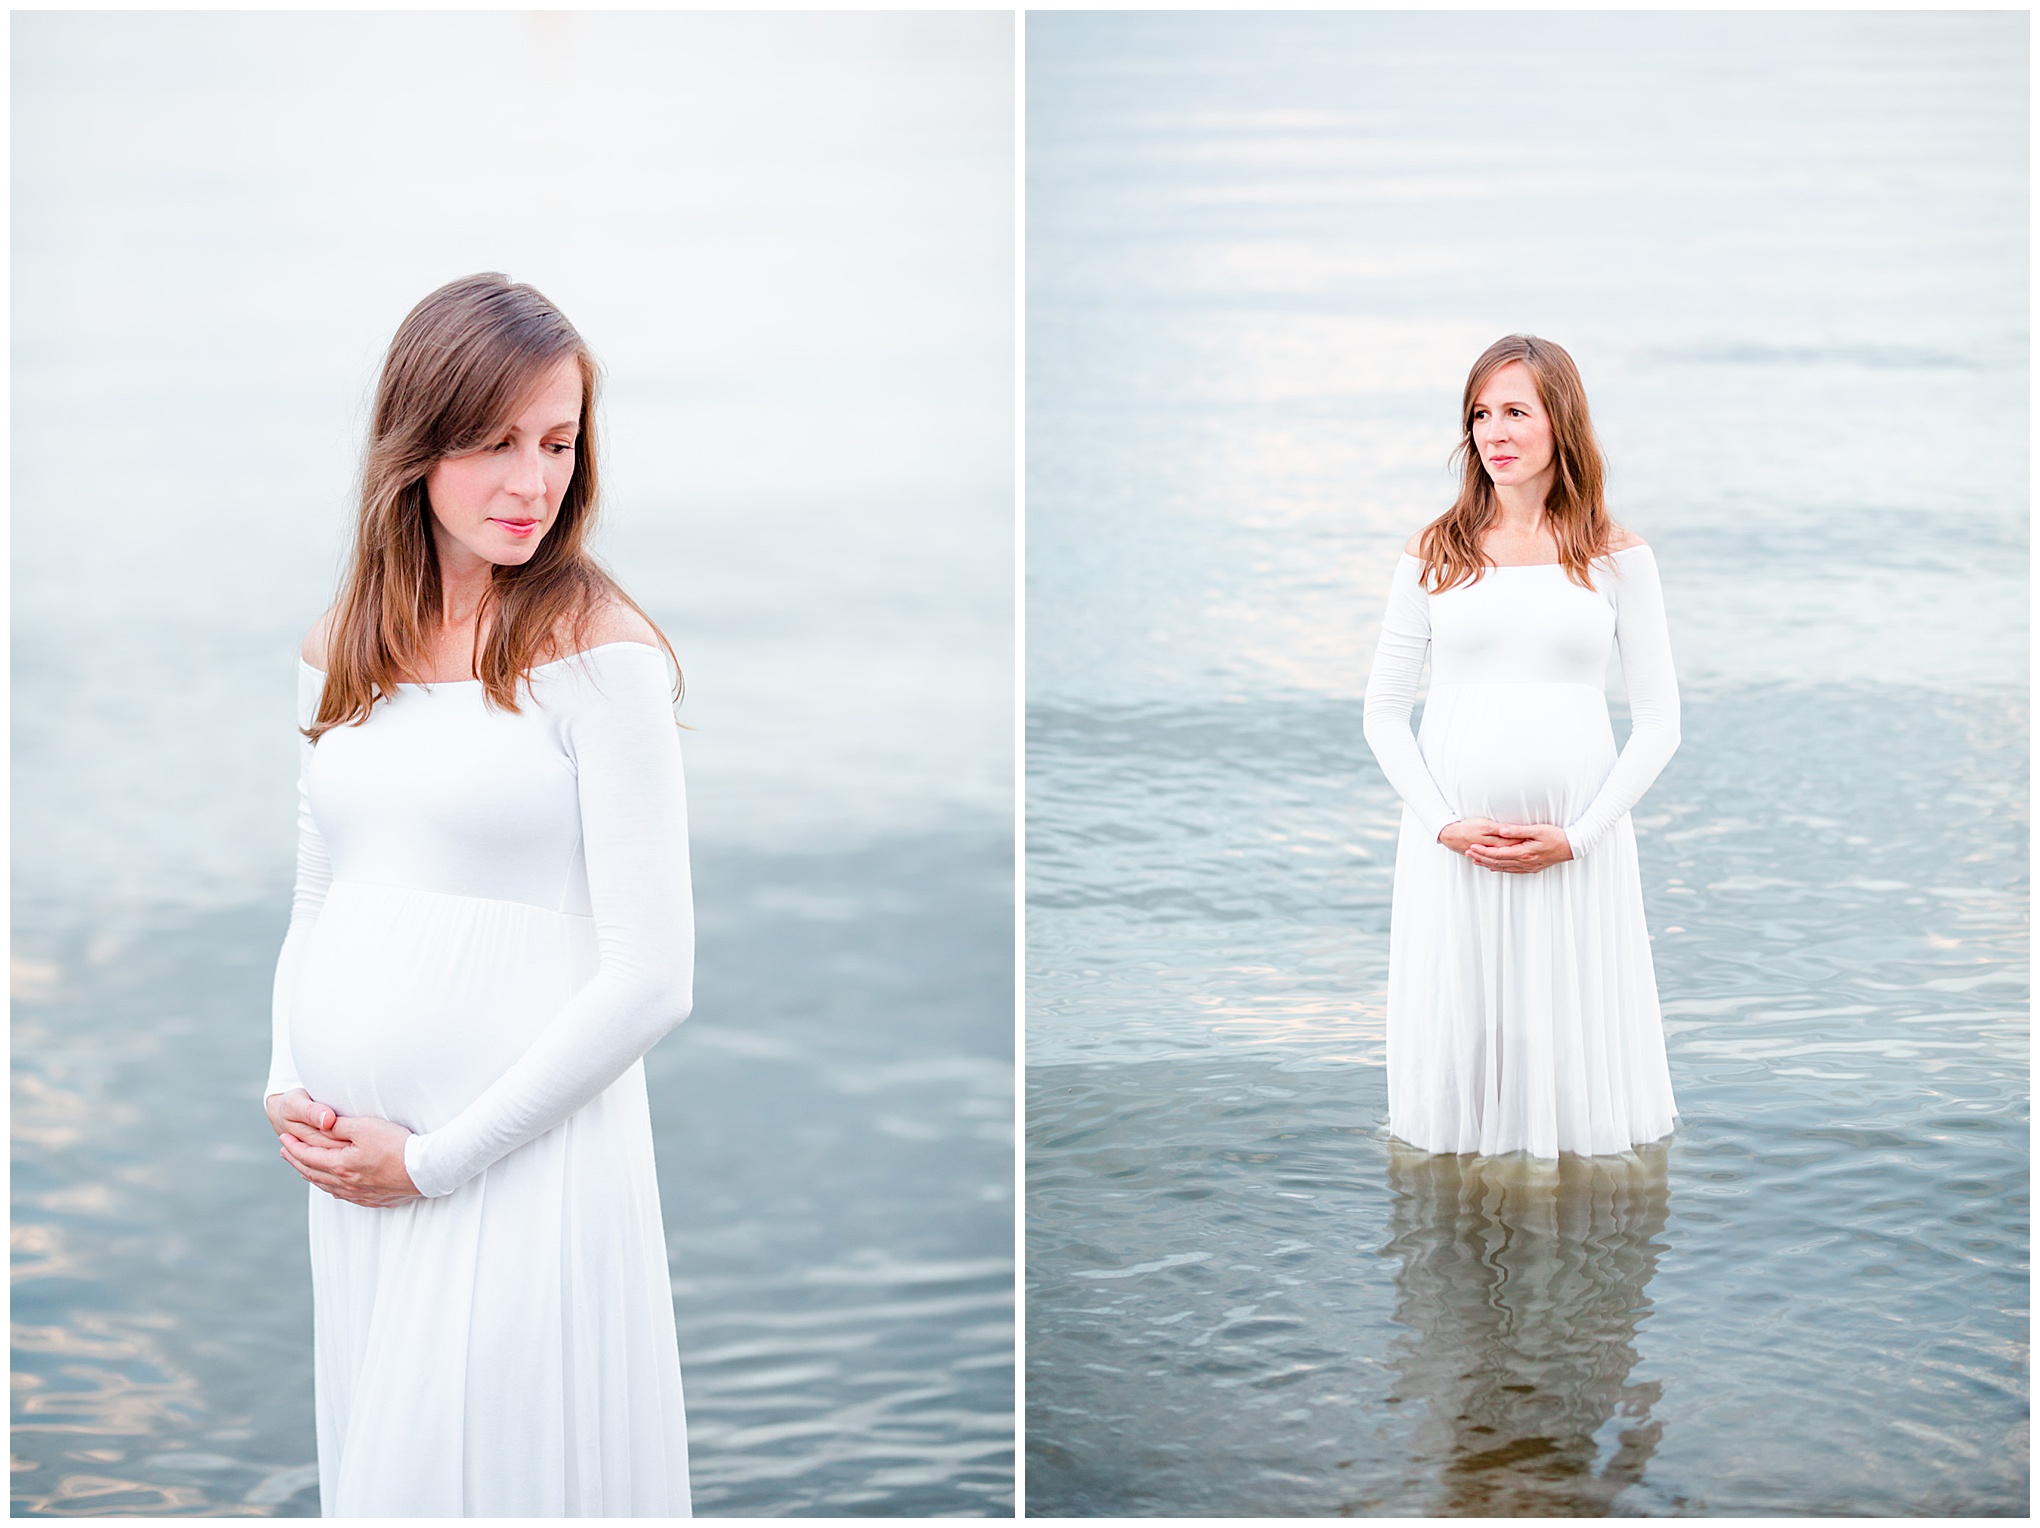 Annapolis waterfront maternity photos, Annapolis maternity photos, Annapolis maternity photographer, summer waterfront portraits, waterfront portraits, sunset portraits, sunset maternity portraits, sunset maternity photos, Annapolis photographer, DC maternity portraits, DC maternity photos, DC maternity photographer, Rachel E.H. Photography, summer maternity photos, maternity photos style, pregnant woman in water